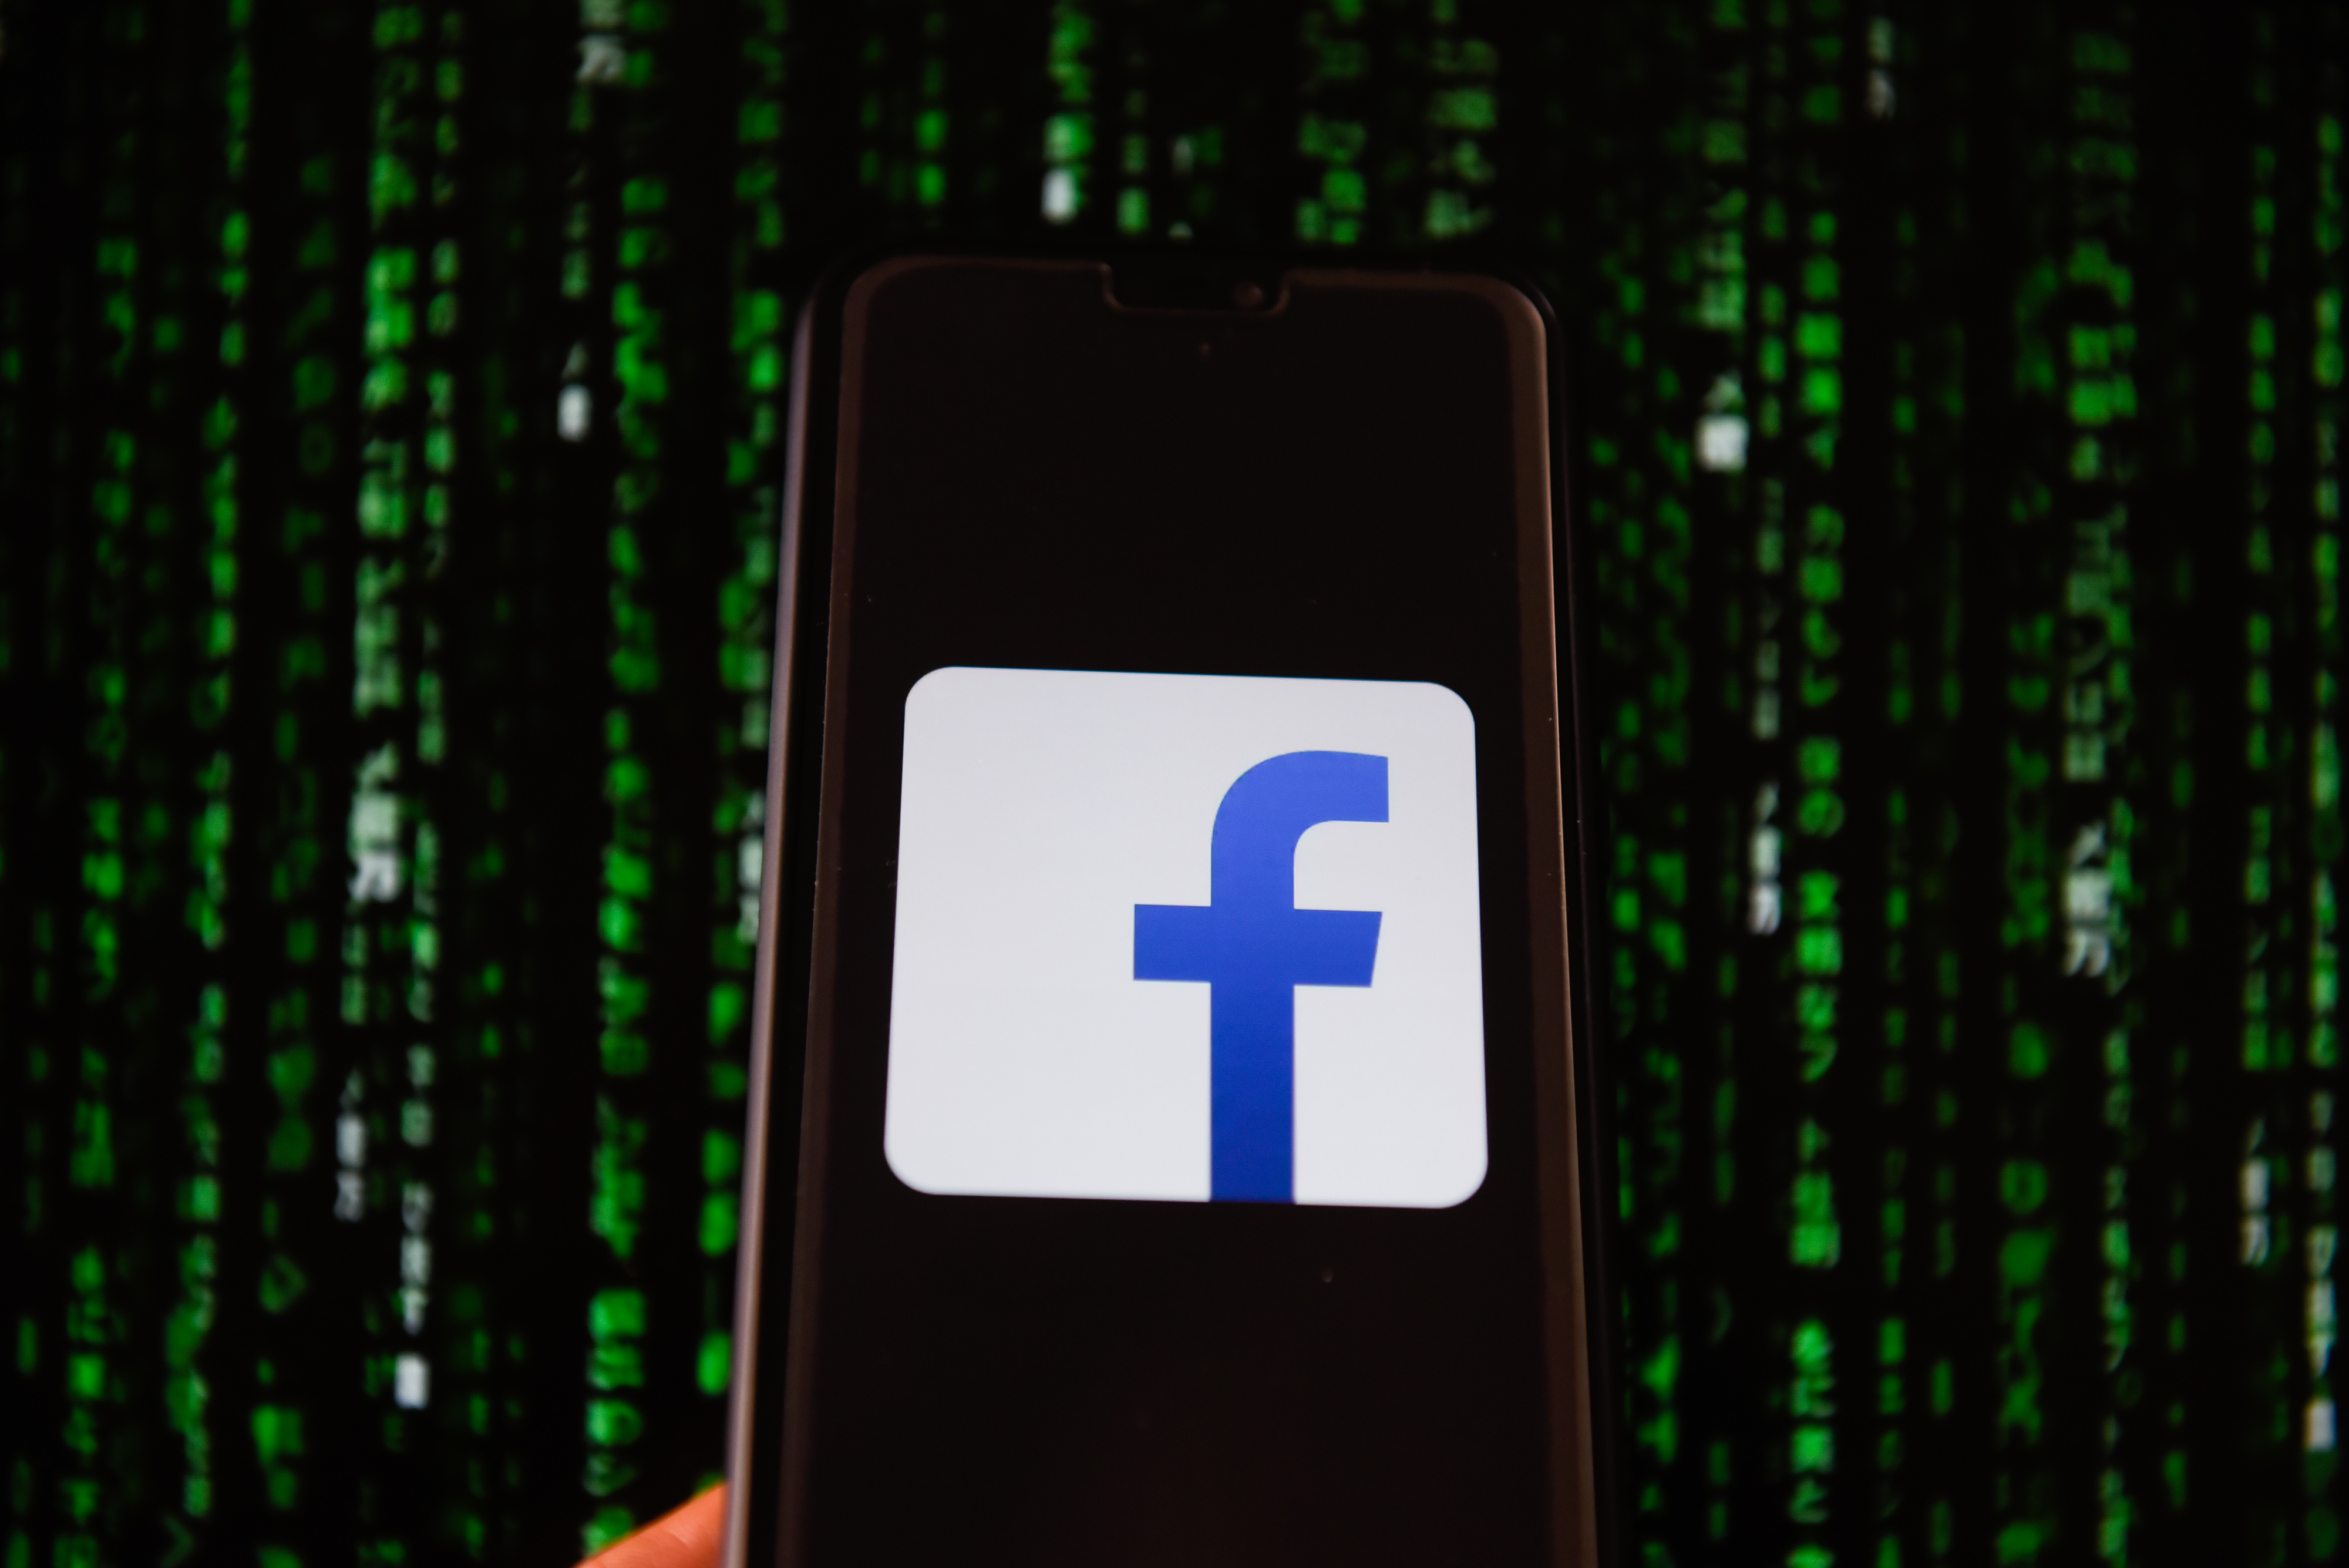 Facebook logo is seen on a mobile phone